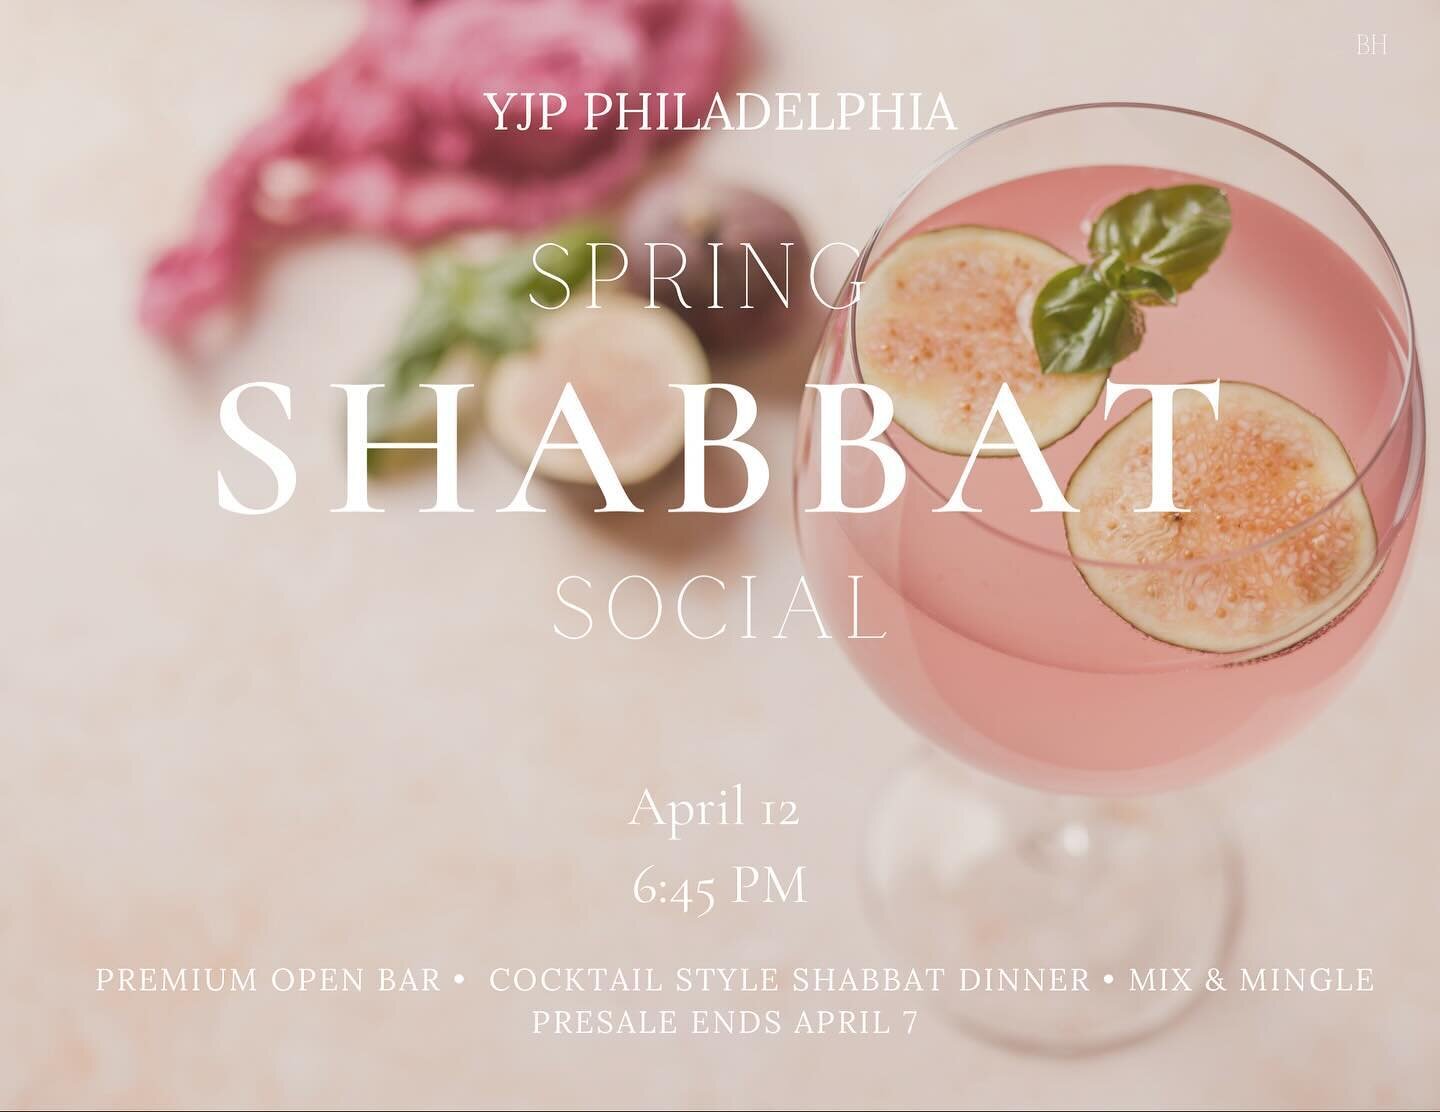 In between all the Purim festivities - Save the date for our next Shabbat Social!! Link in bio.